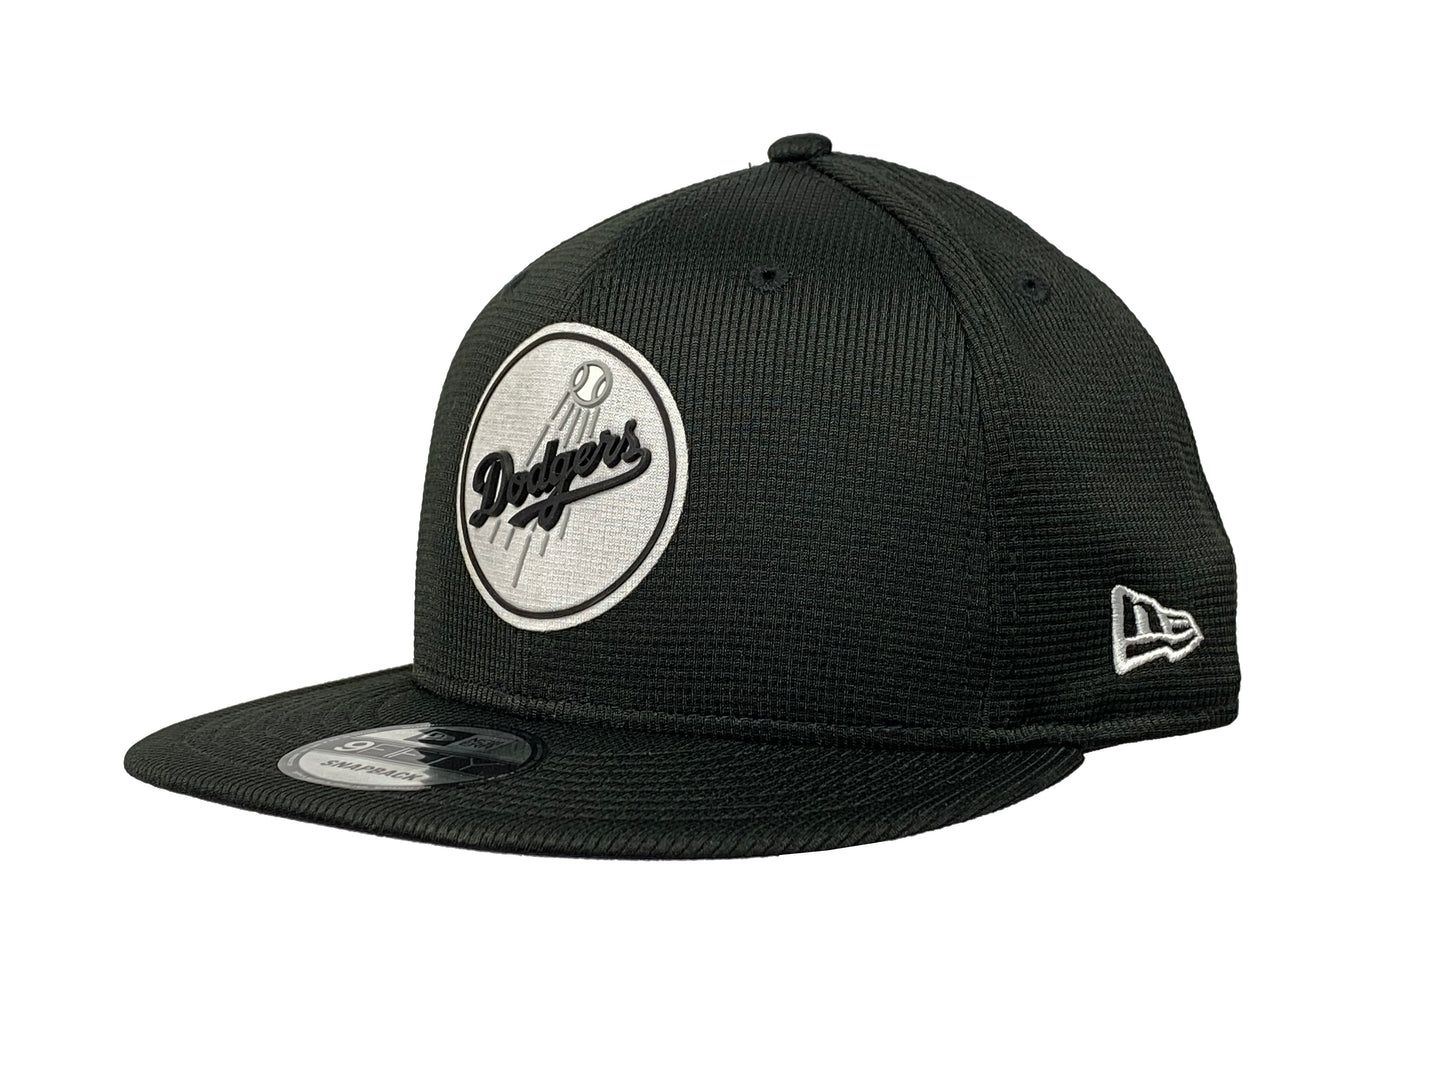 LOS ANGELES DODGERS CLUBHOUSE 950 BLACK/WHITE